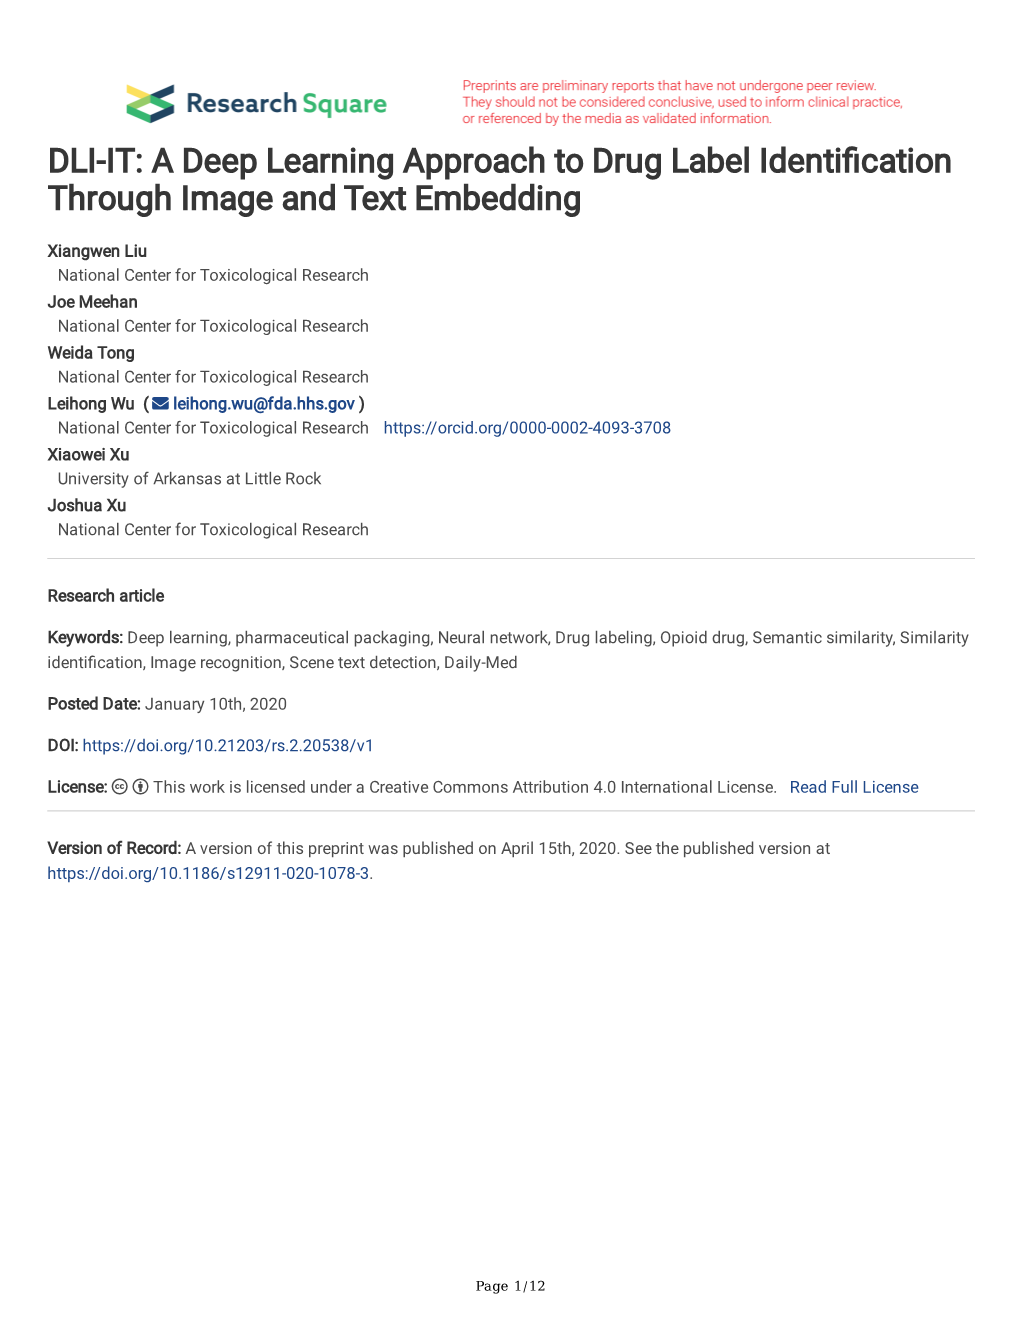 A Deep Learning Approach to Drug Label Identification Through Image